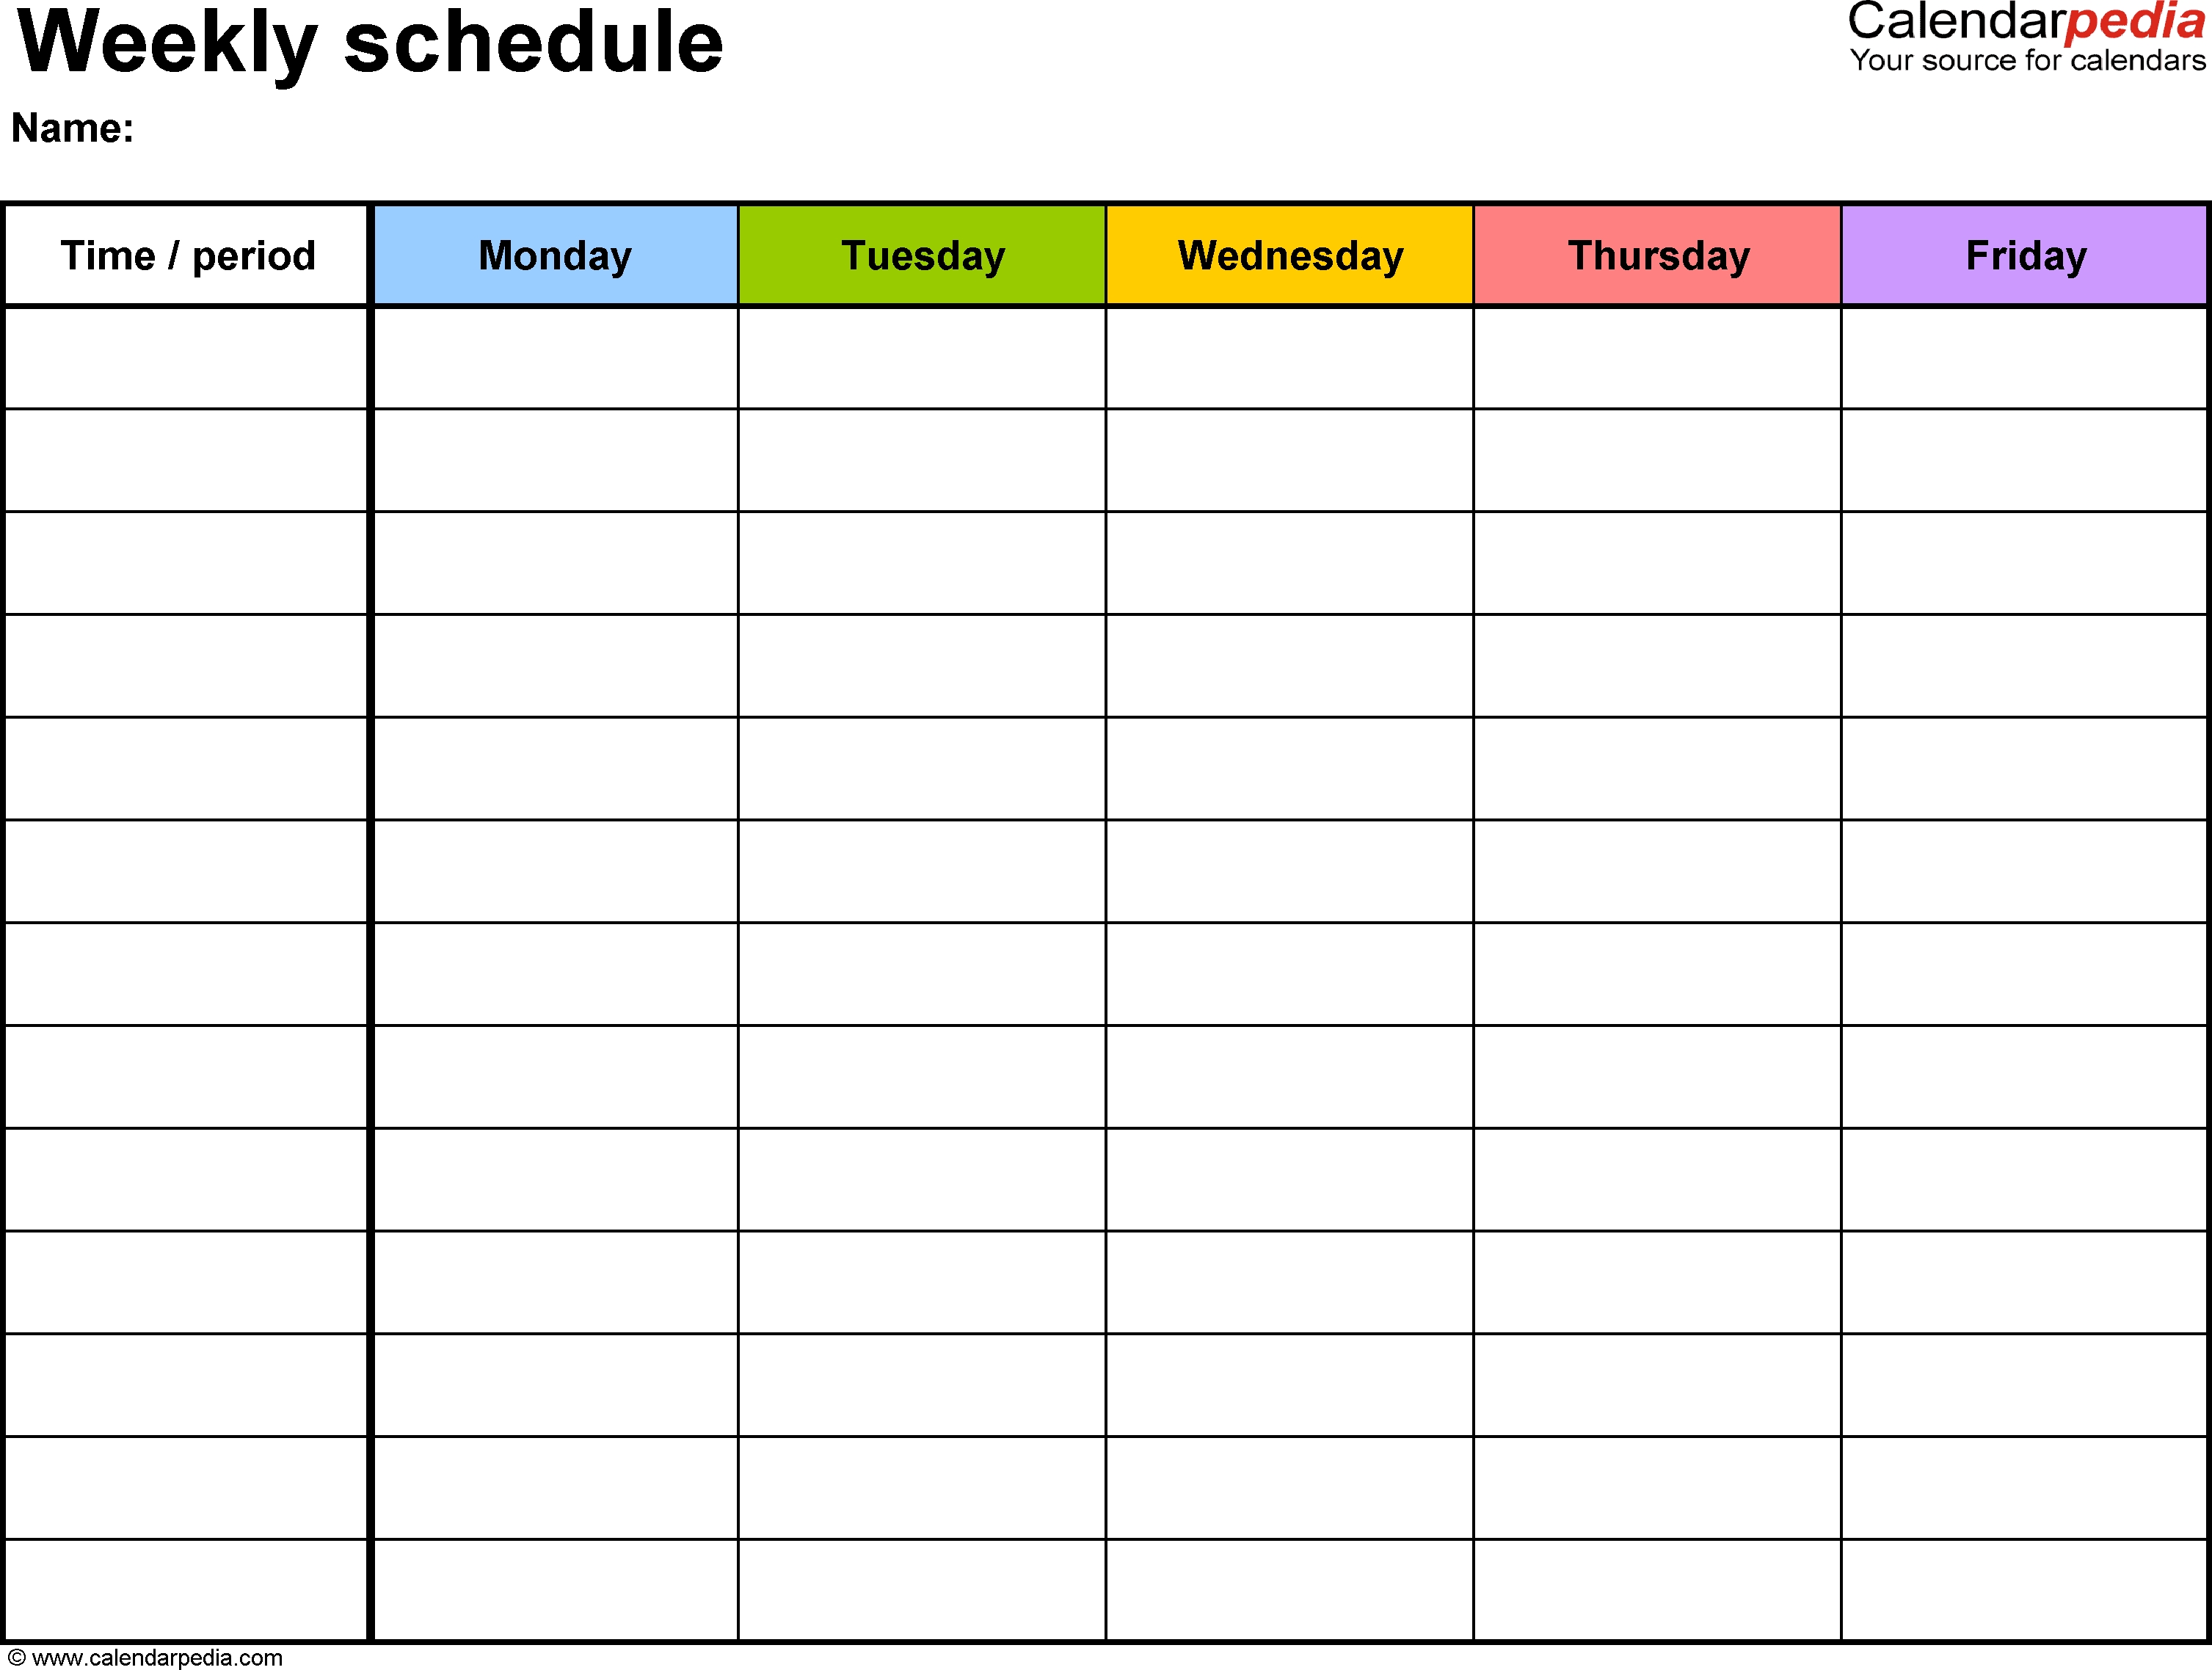 Free Weekly Schedule Templates For Word - 18 Templates with regard to Weekly Calendar Template 7 Day